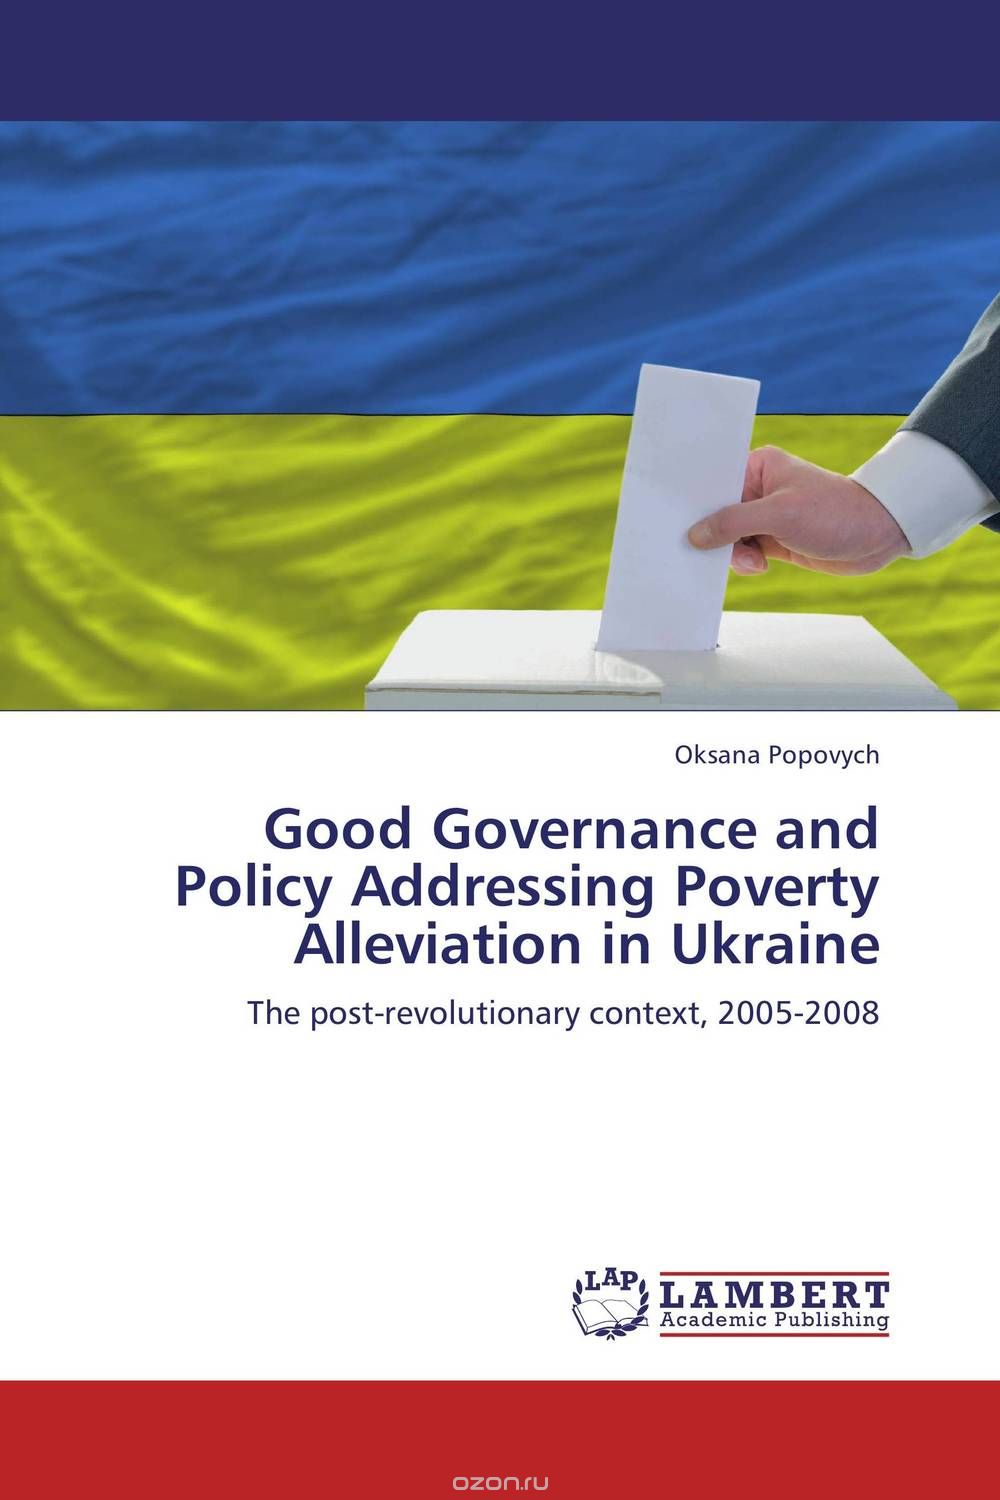 Good Governance and Policy Addressing Poverty Alleviation in Ukraine